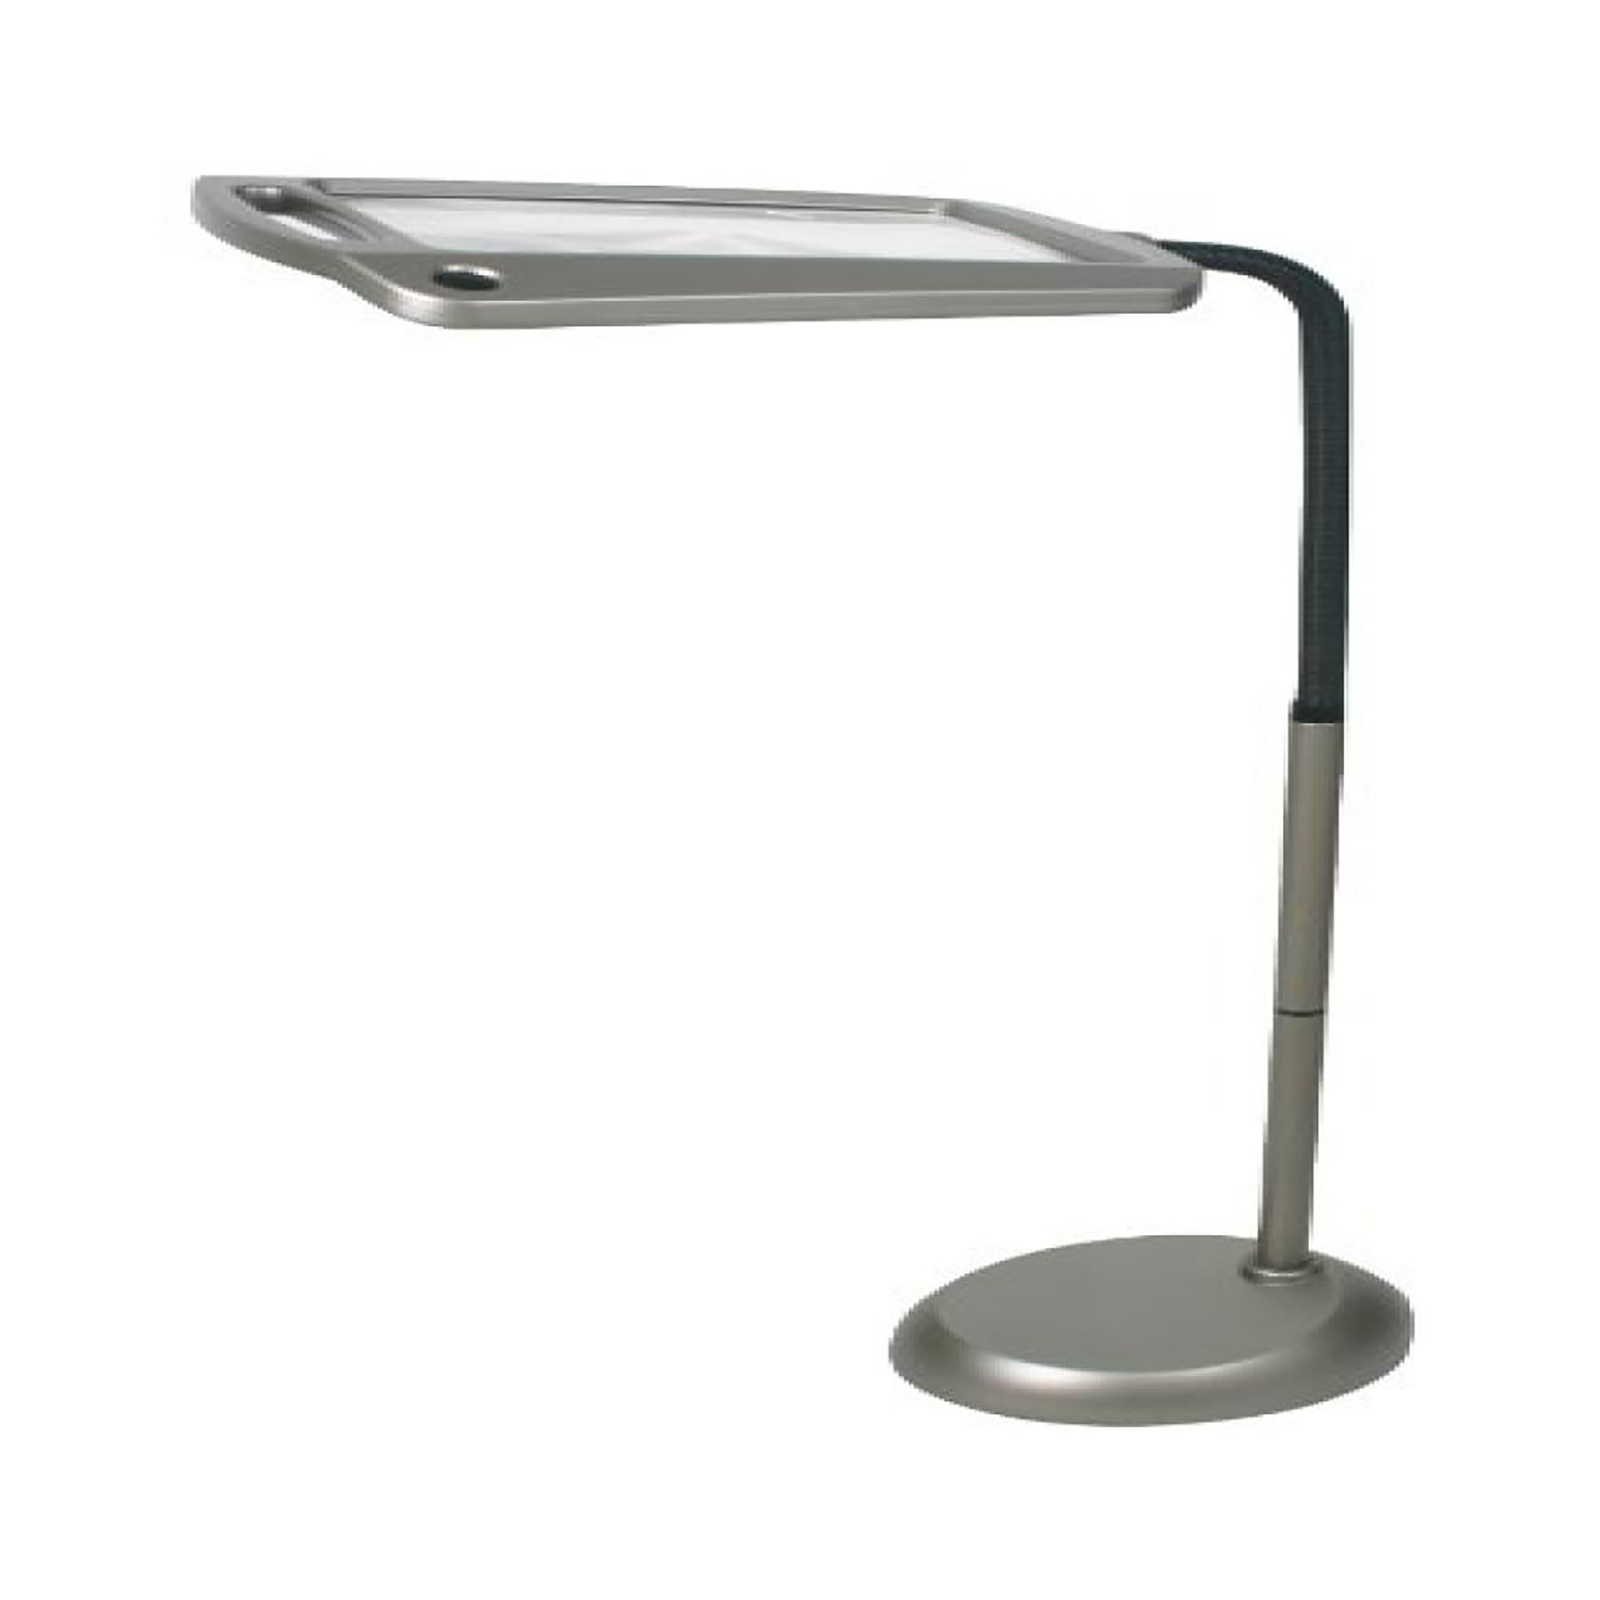 daylight 24 41" Full Page Magnifier Metal Floor Lamp - Silver